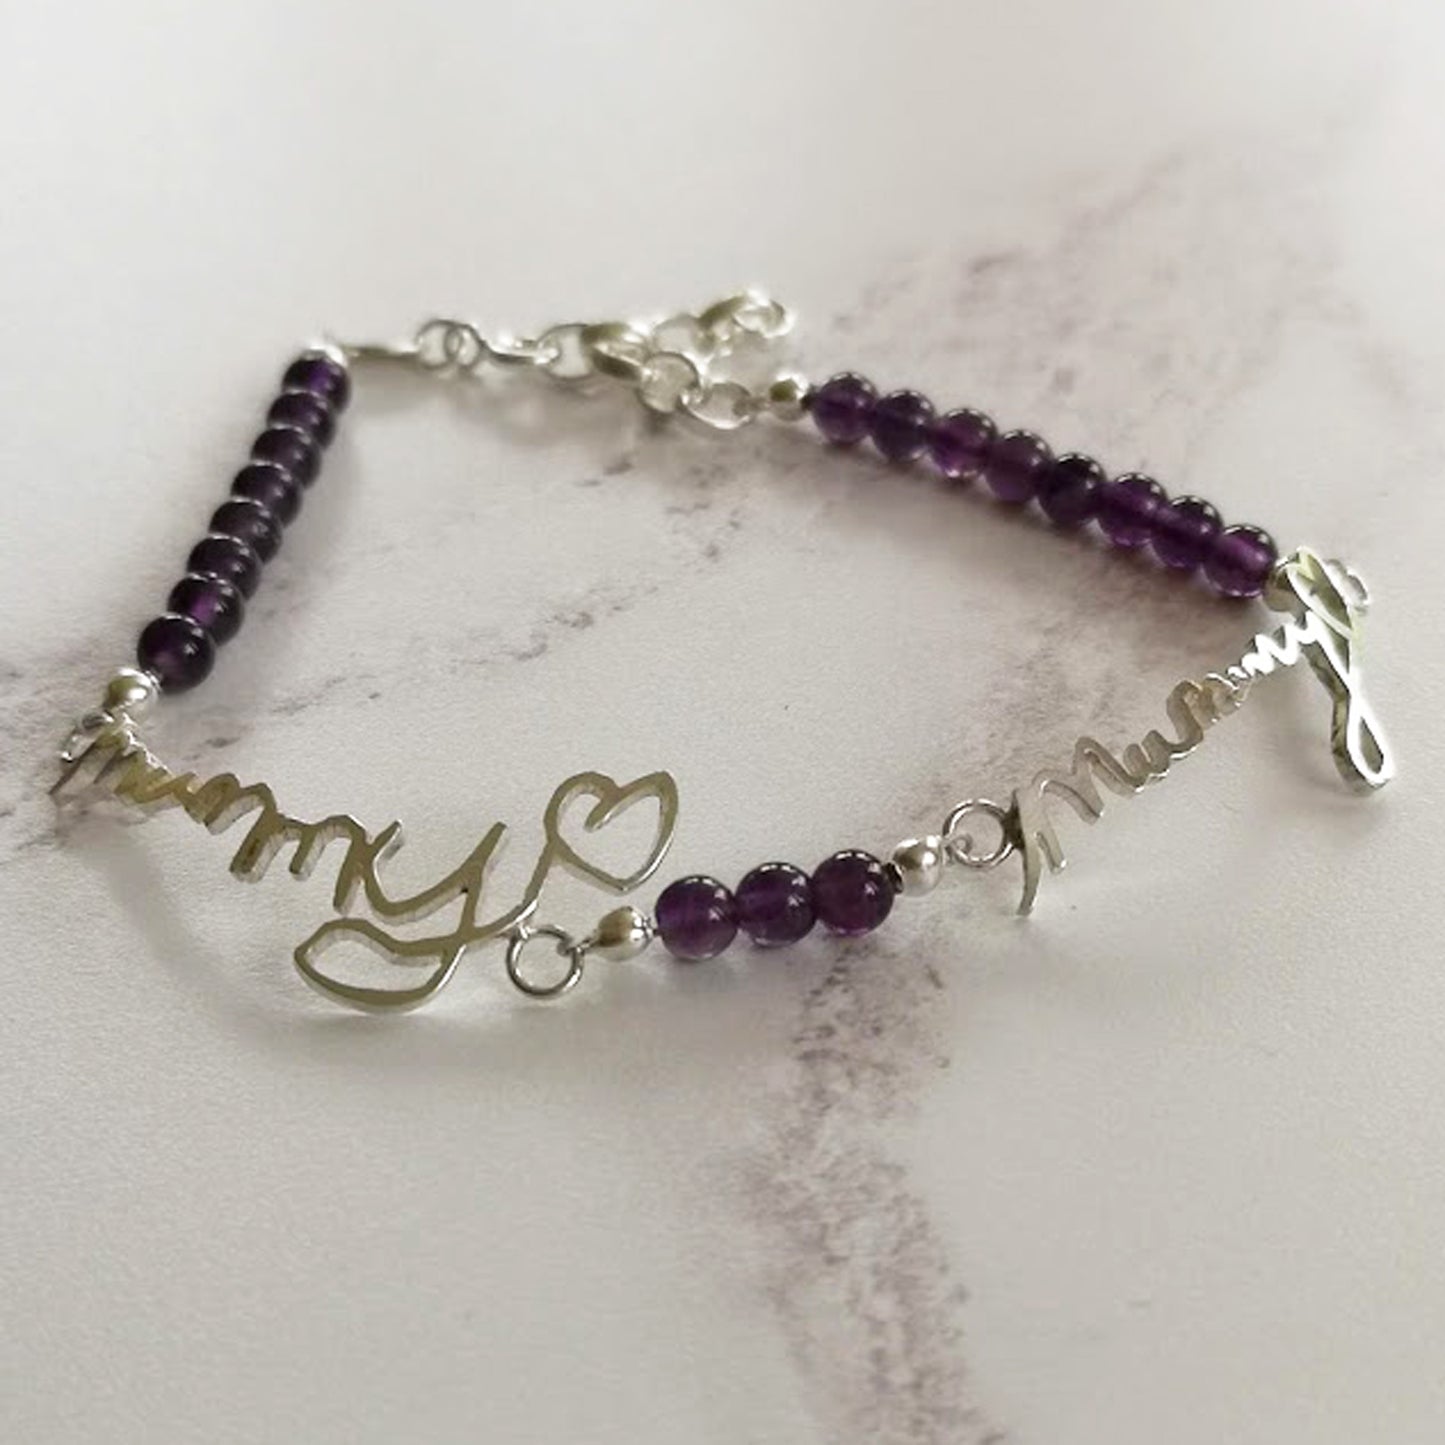 Gemstone Handwriting Bracelet with Two Pieces of Handwriting